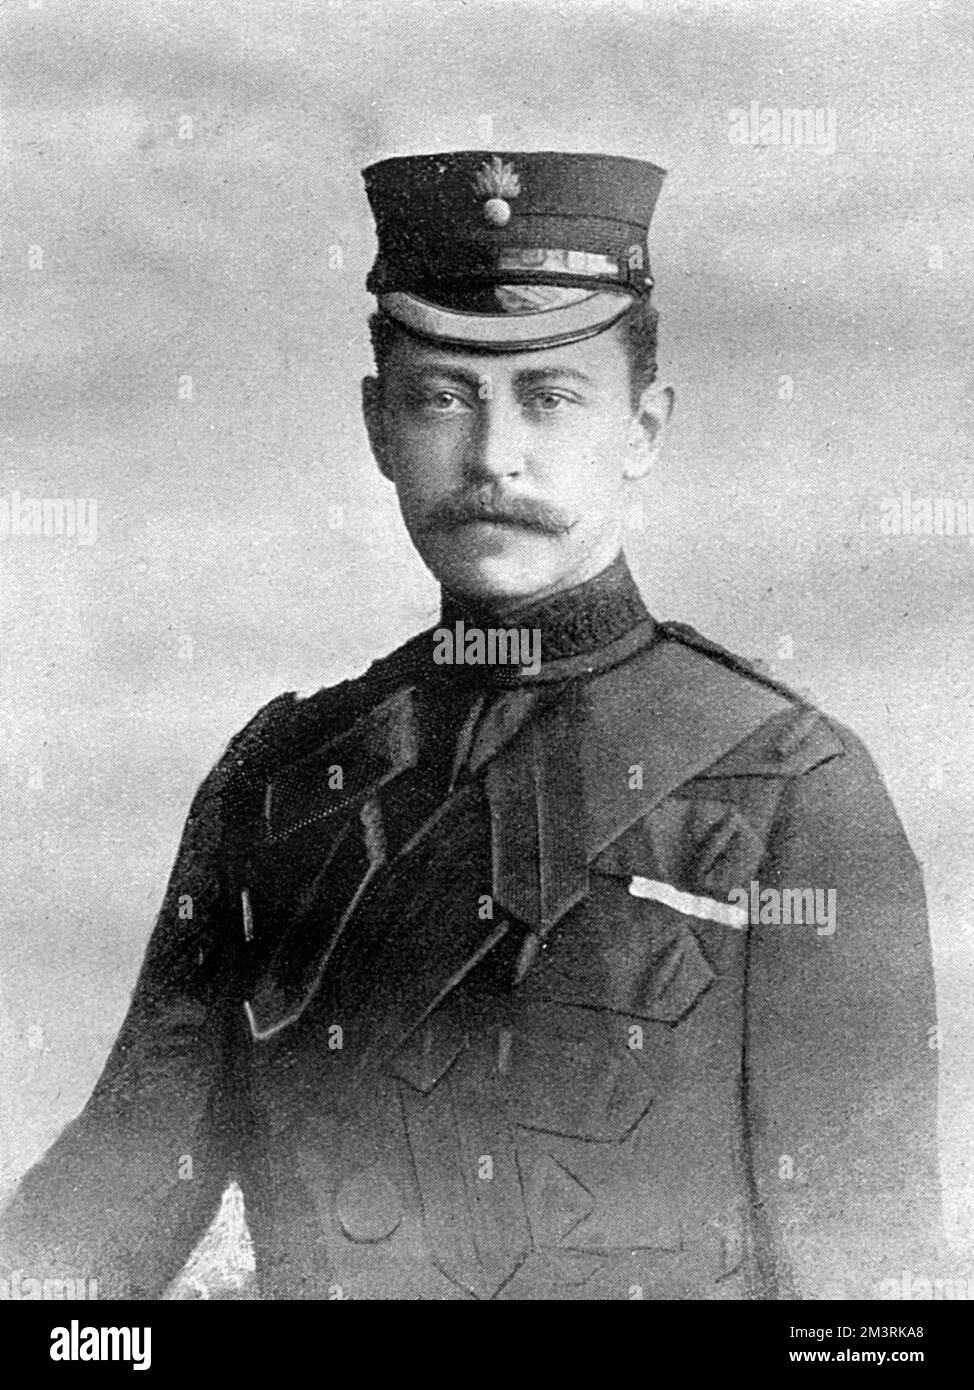 Major-General Lord Albert &quot;Edward&quot; Wilfred Gleichen, KCVO, CB, CMG, DSO (1863 - 1937), British courtier and soldier. Pictured in The Sketch at the time of the Second Boer War when he was wounded at the Battle of Modder River.   1899 Stock Photo